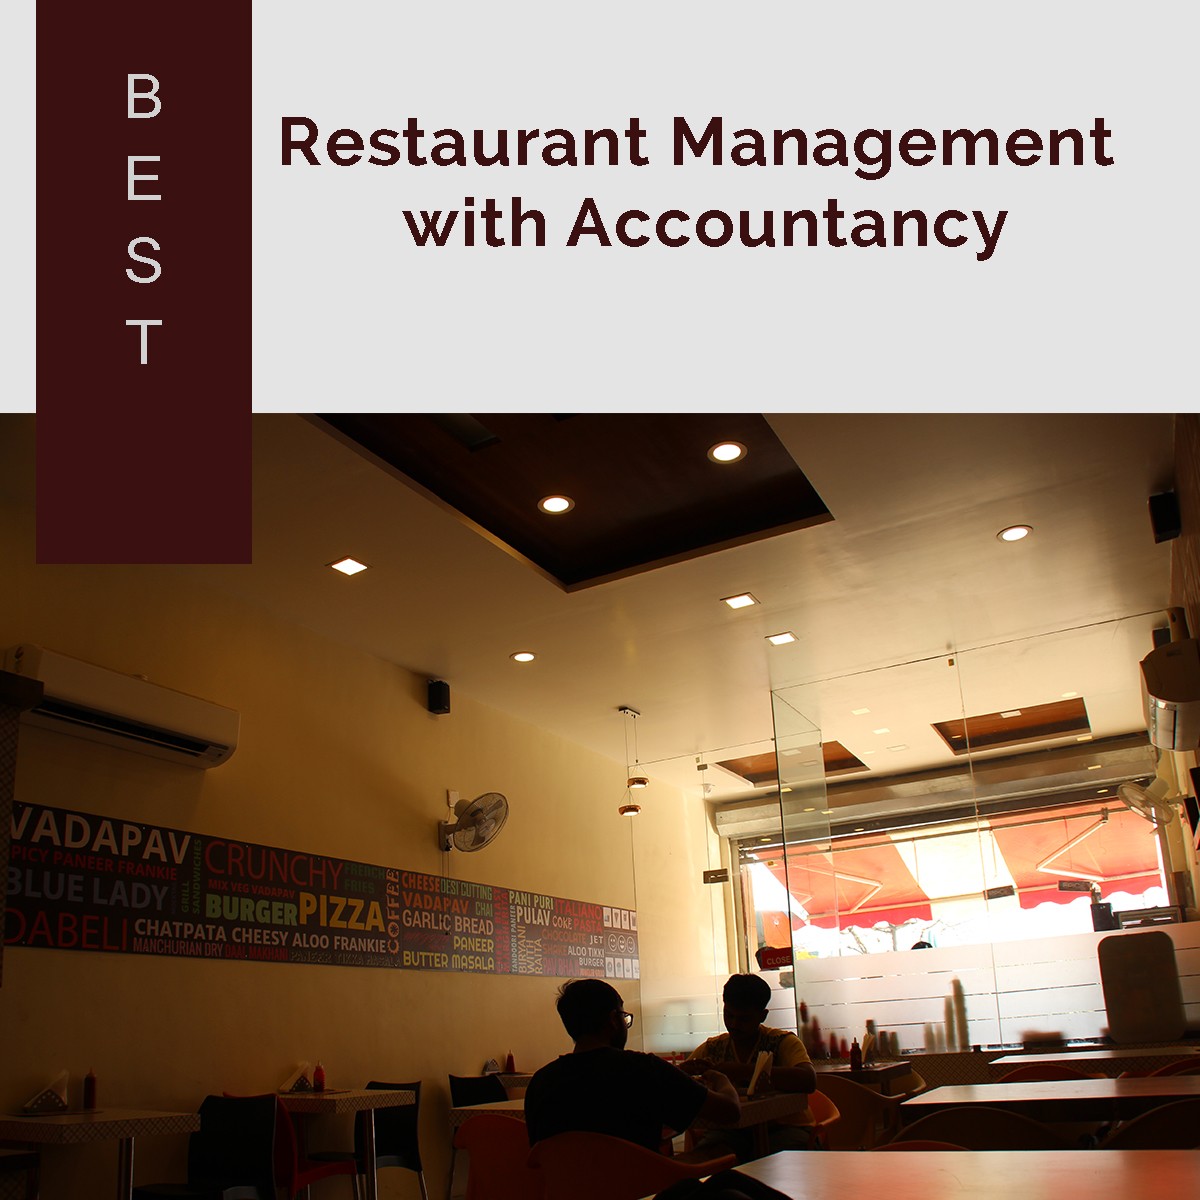 Restaurant Management with Accountancy